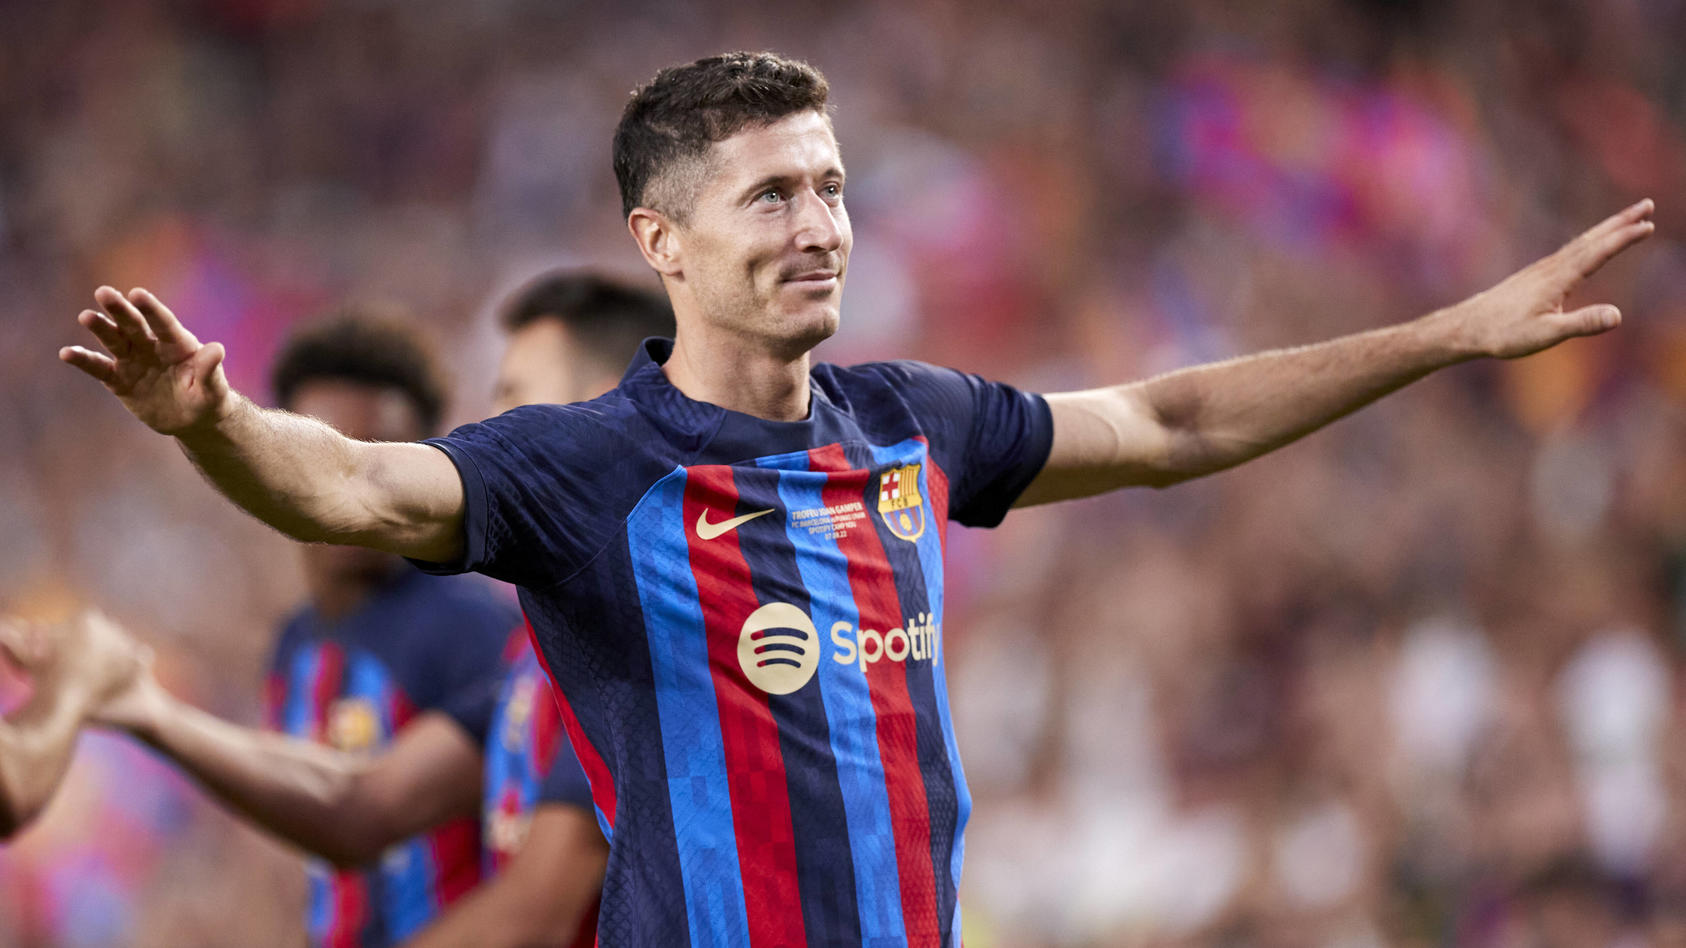  BARCELONA, SPAIN - AUGUST 7: Robert Lewandowski of FC Barcelona, Barca reacts after scoring goal during the pre-season friendly match of Trofeu Joan Gamper between FC Barcelona and Pumas UNAM on August 7, 2022 at Spotify Camp Nou in Barcelona, Spain